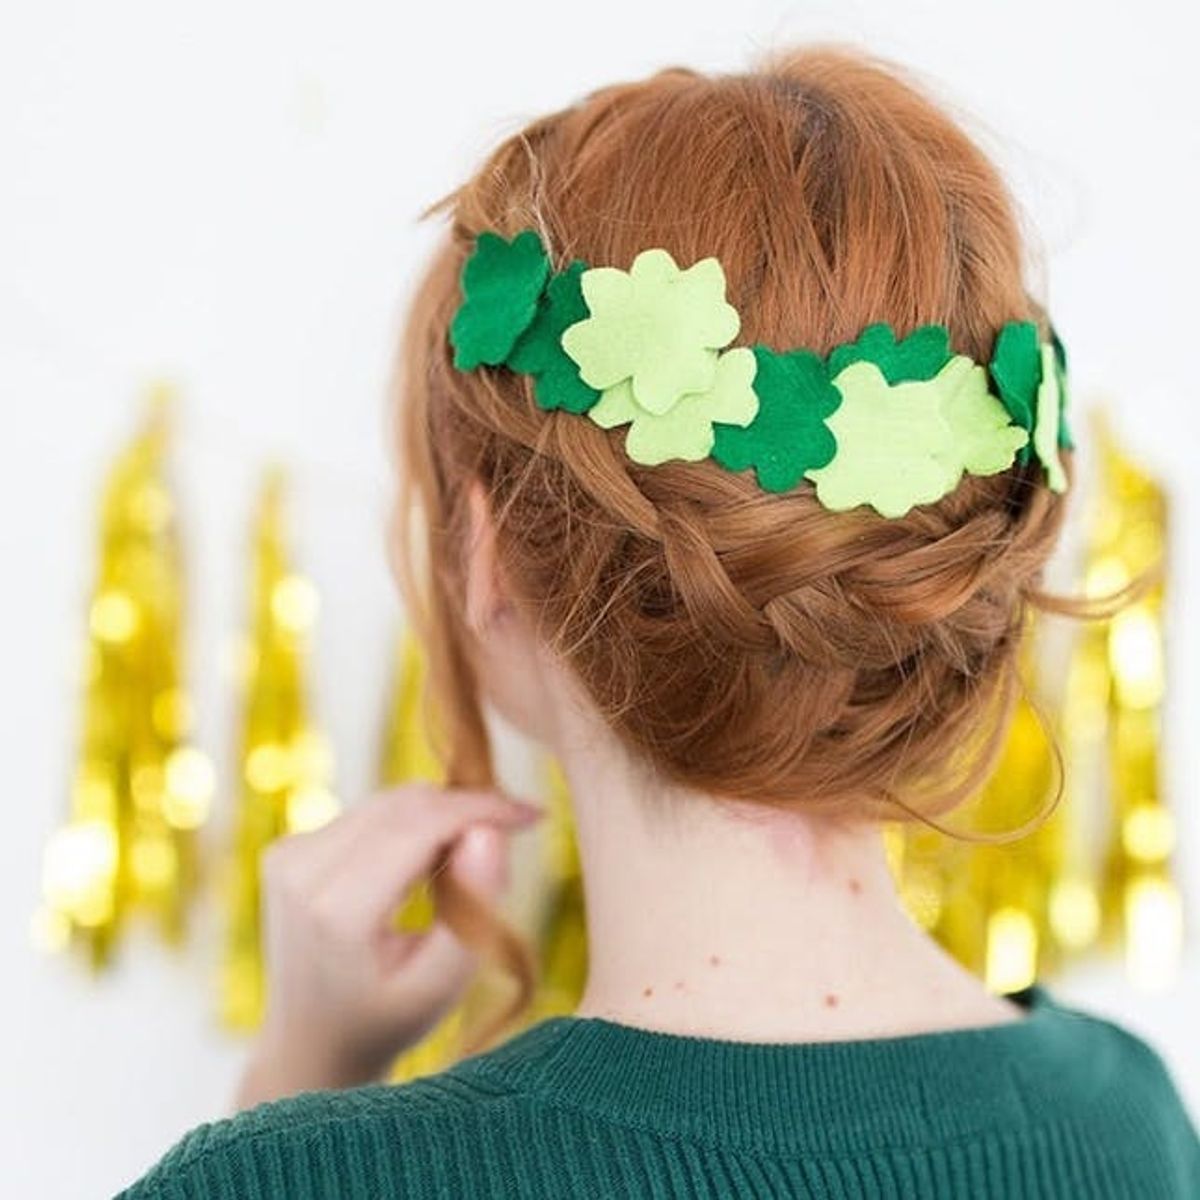 13 Ideas for the Ultimate St. Patrick’s Day Party